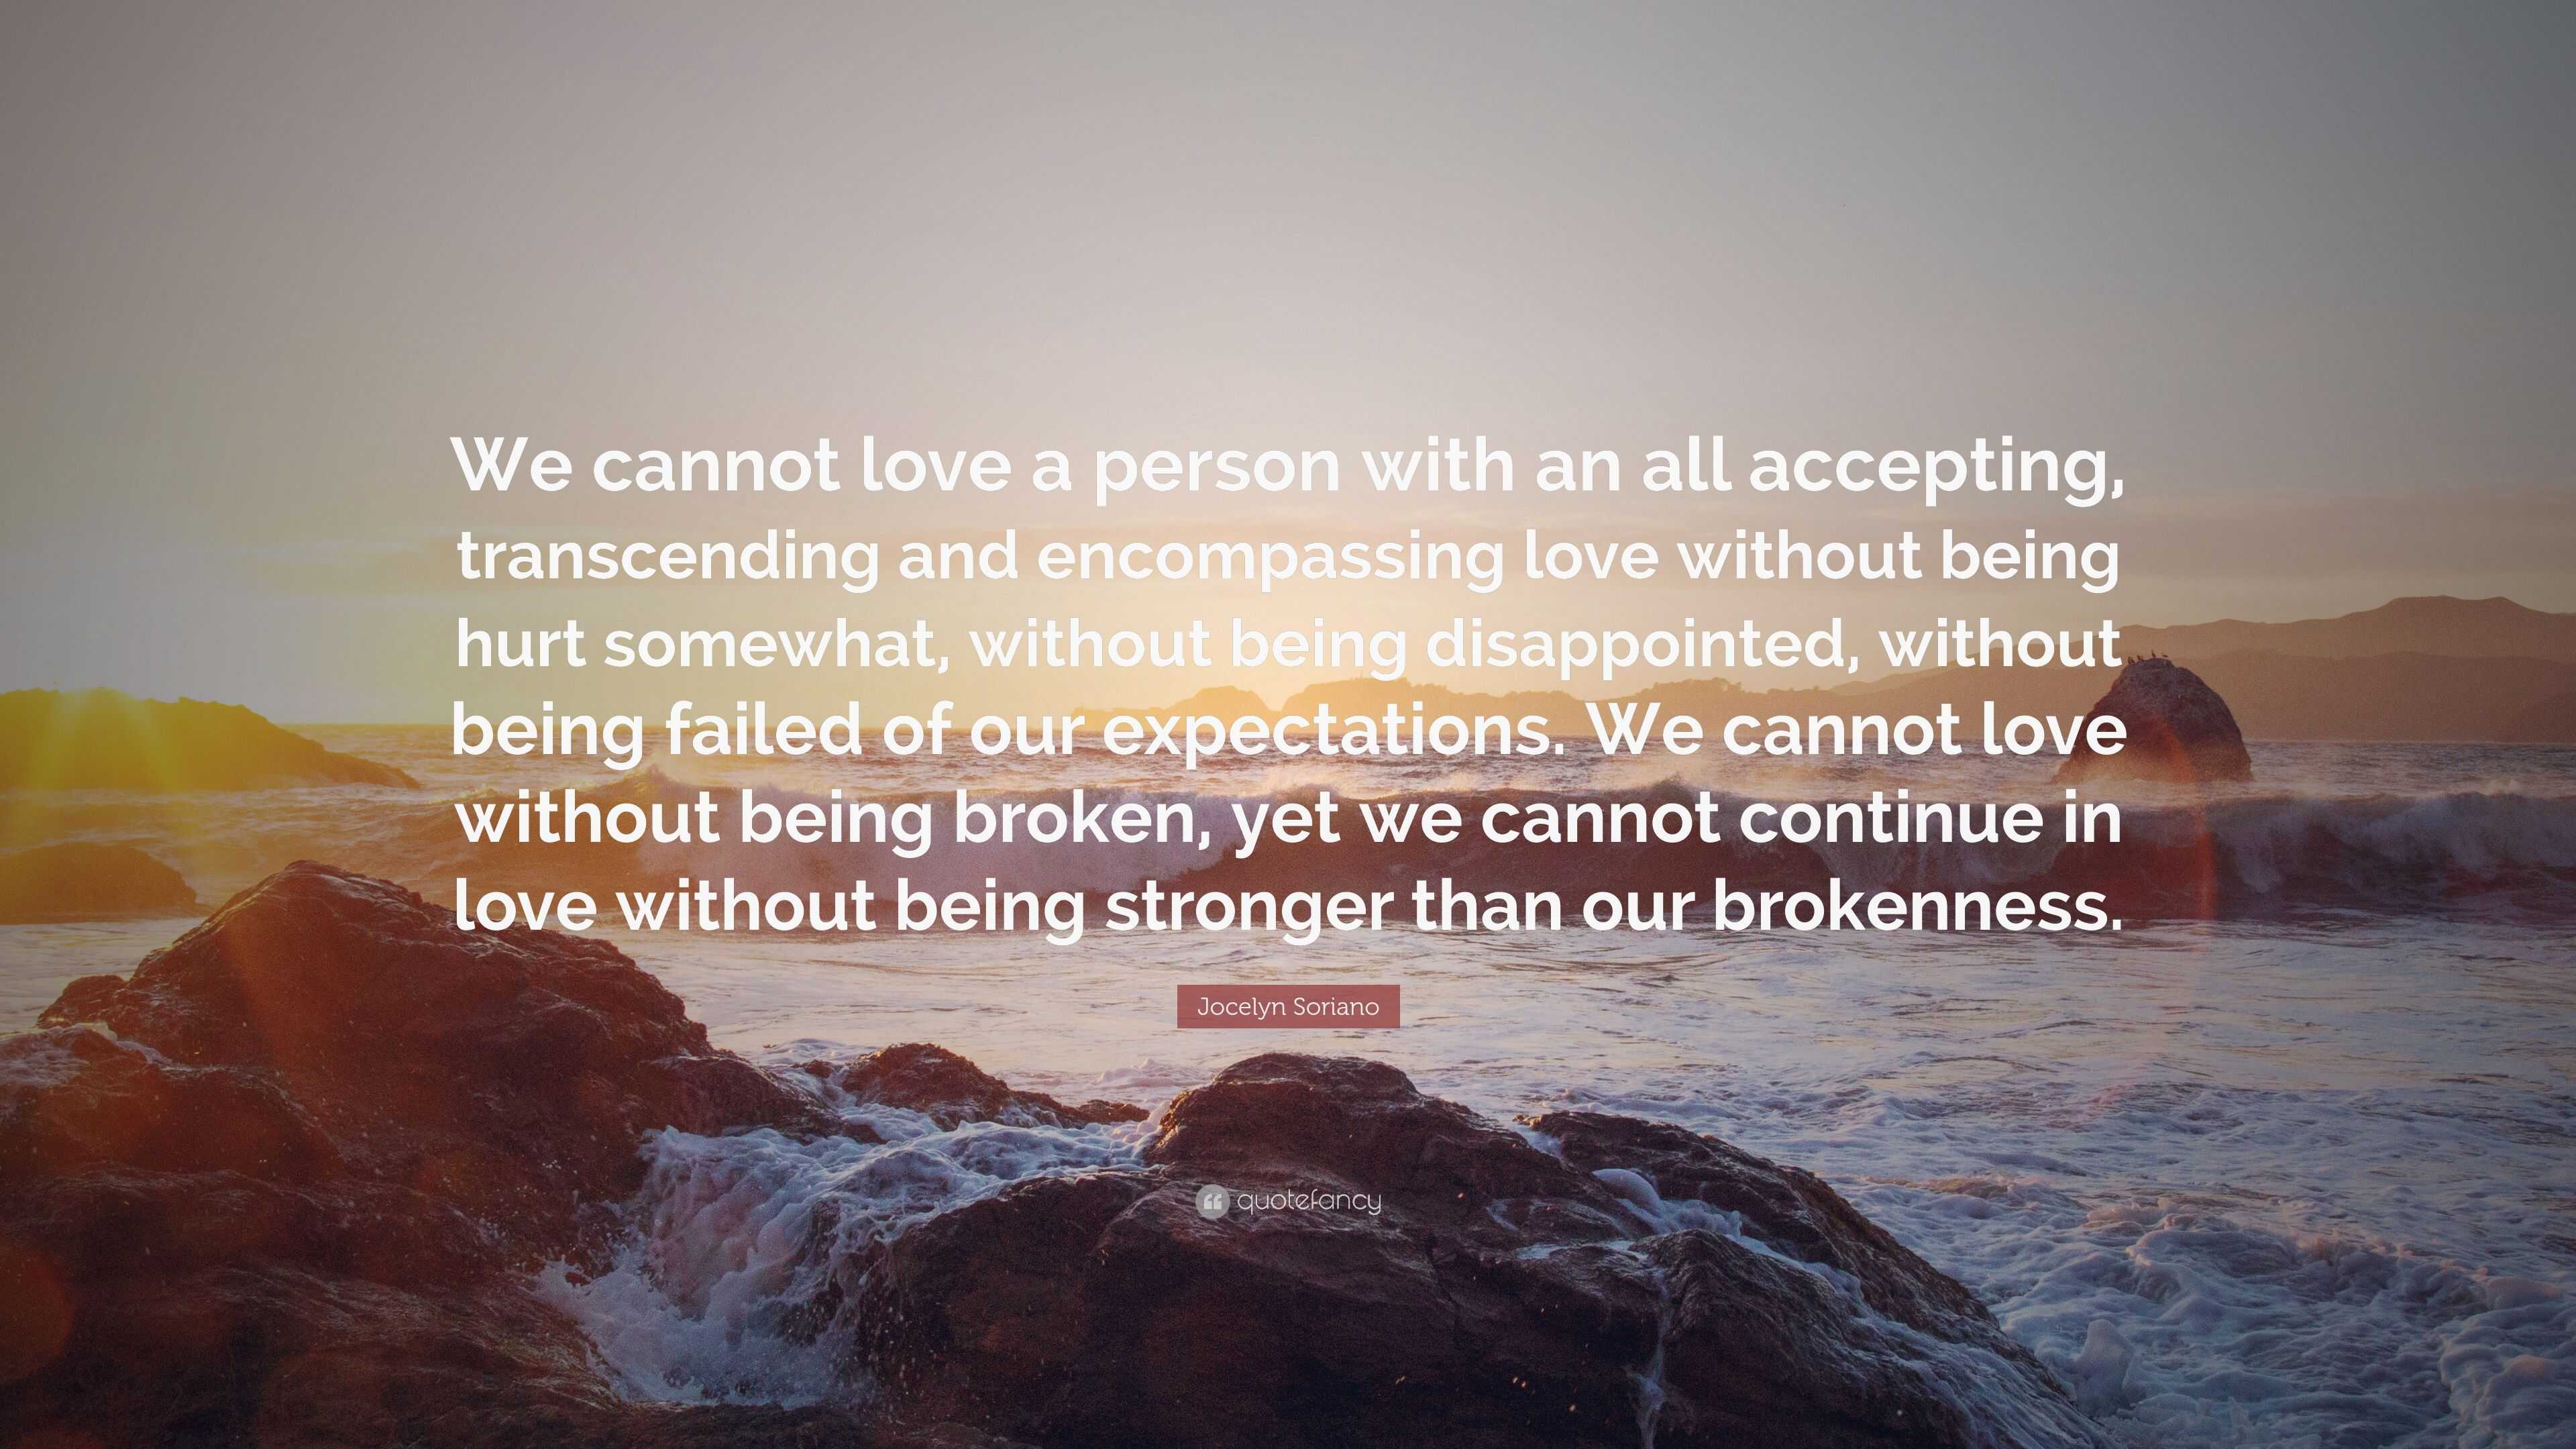 Jocelyn Soriano Quote “We cannot love a person with an all accepting transcending